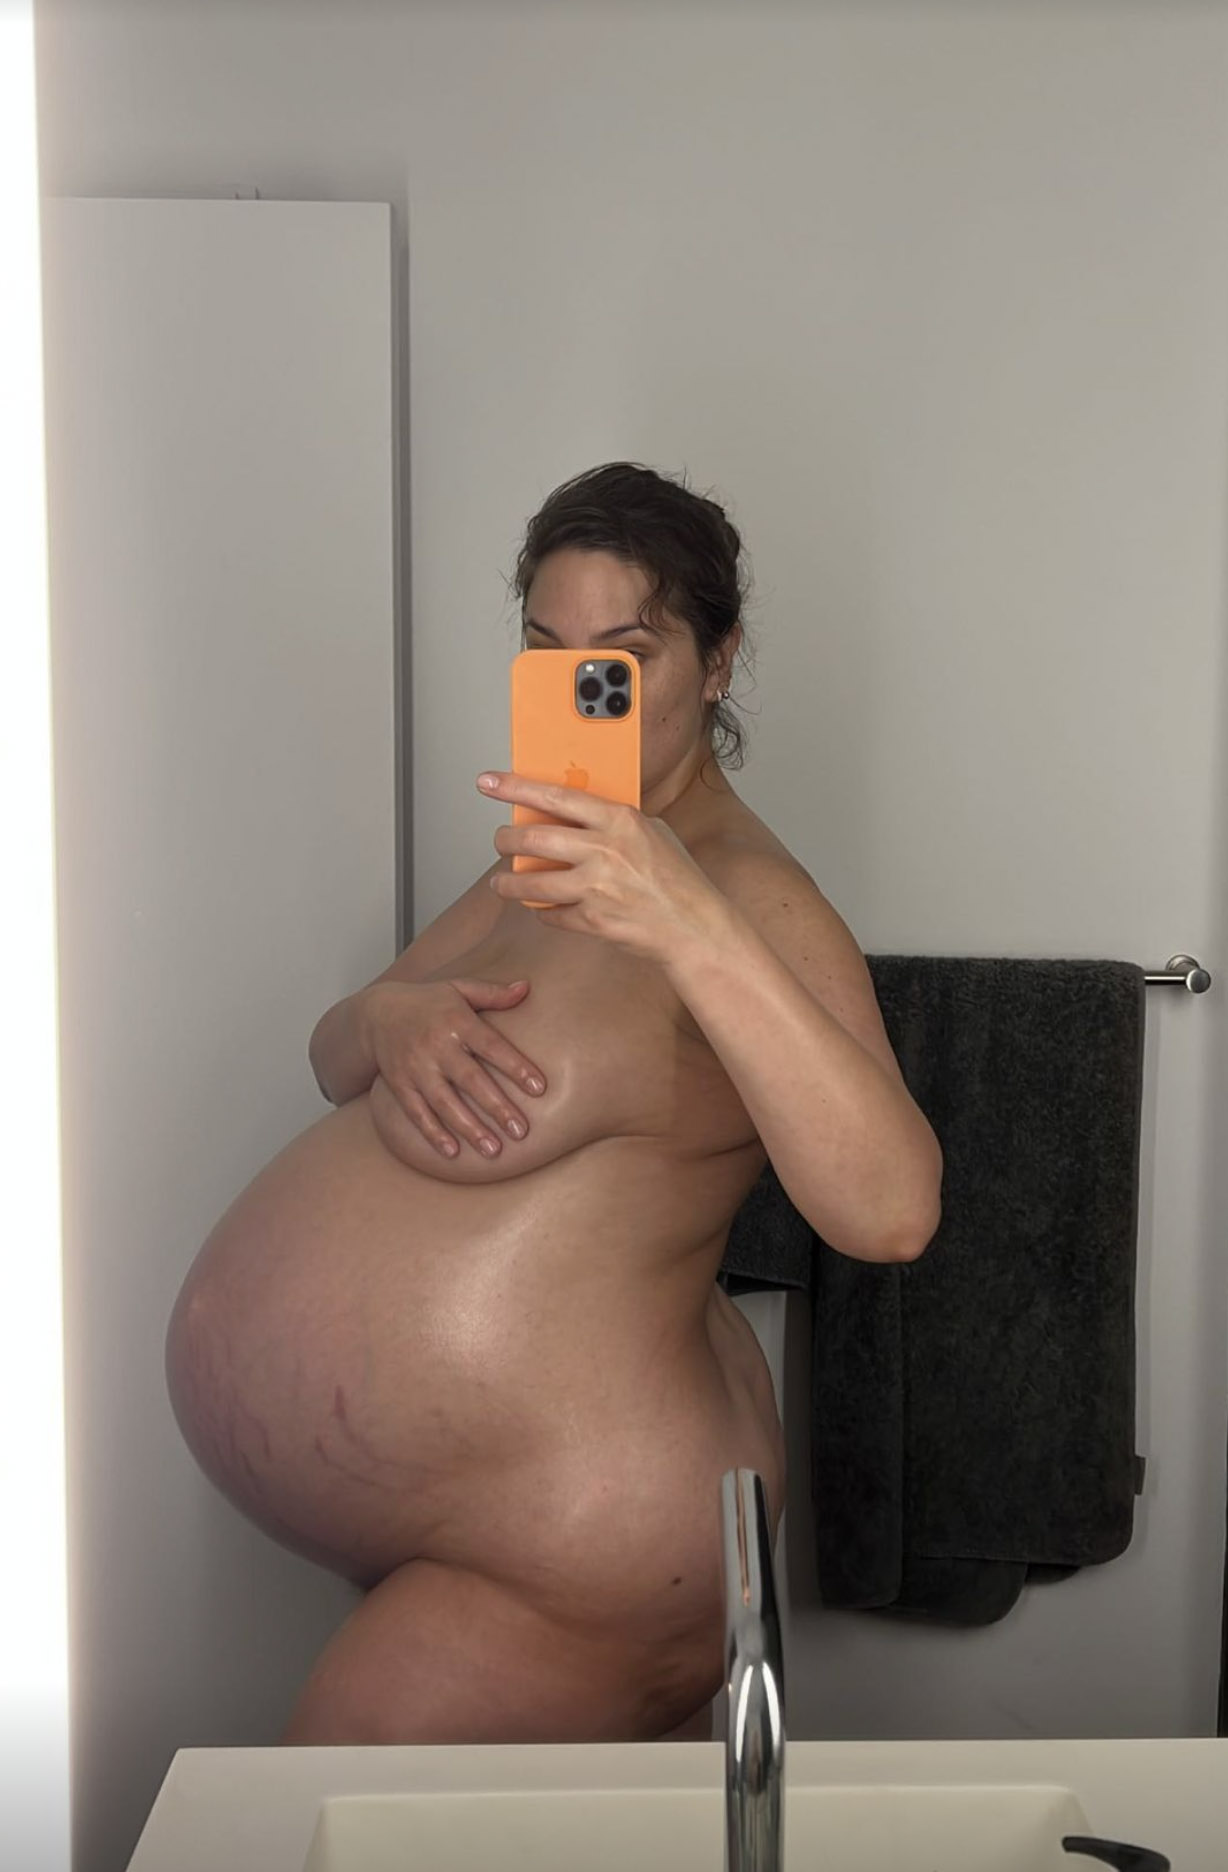 Ashley Graham strips down to show off her growing baby bump as she gets ready to give birth to twin boys with husband Justin Ervin on Monday, Dec. 20, 2021.